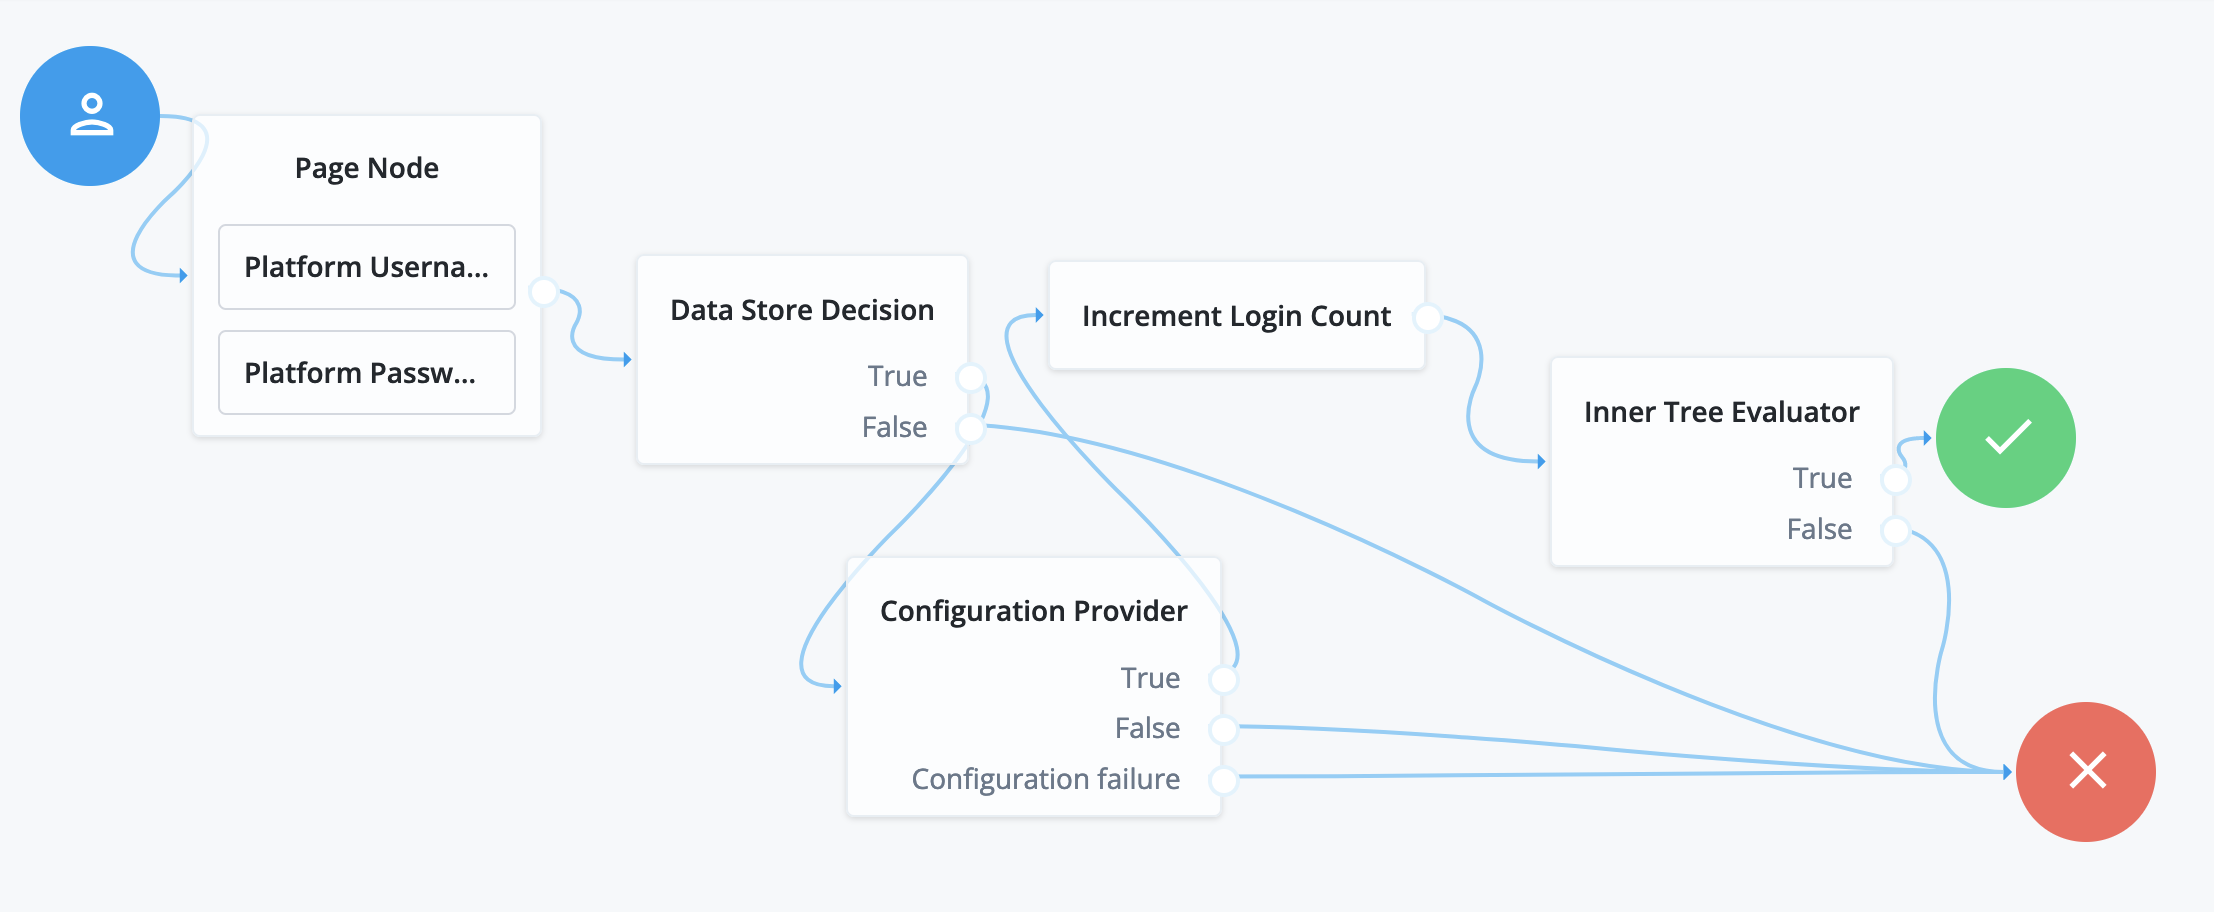 Journey with a [.label]#Configuration Provider# node